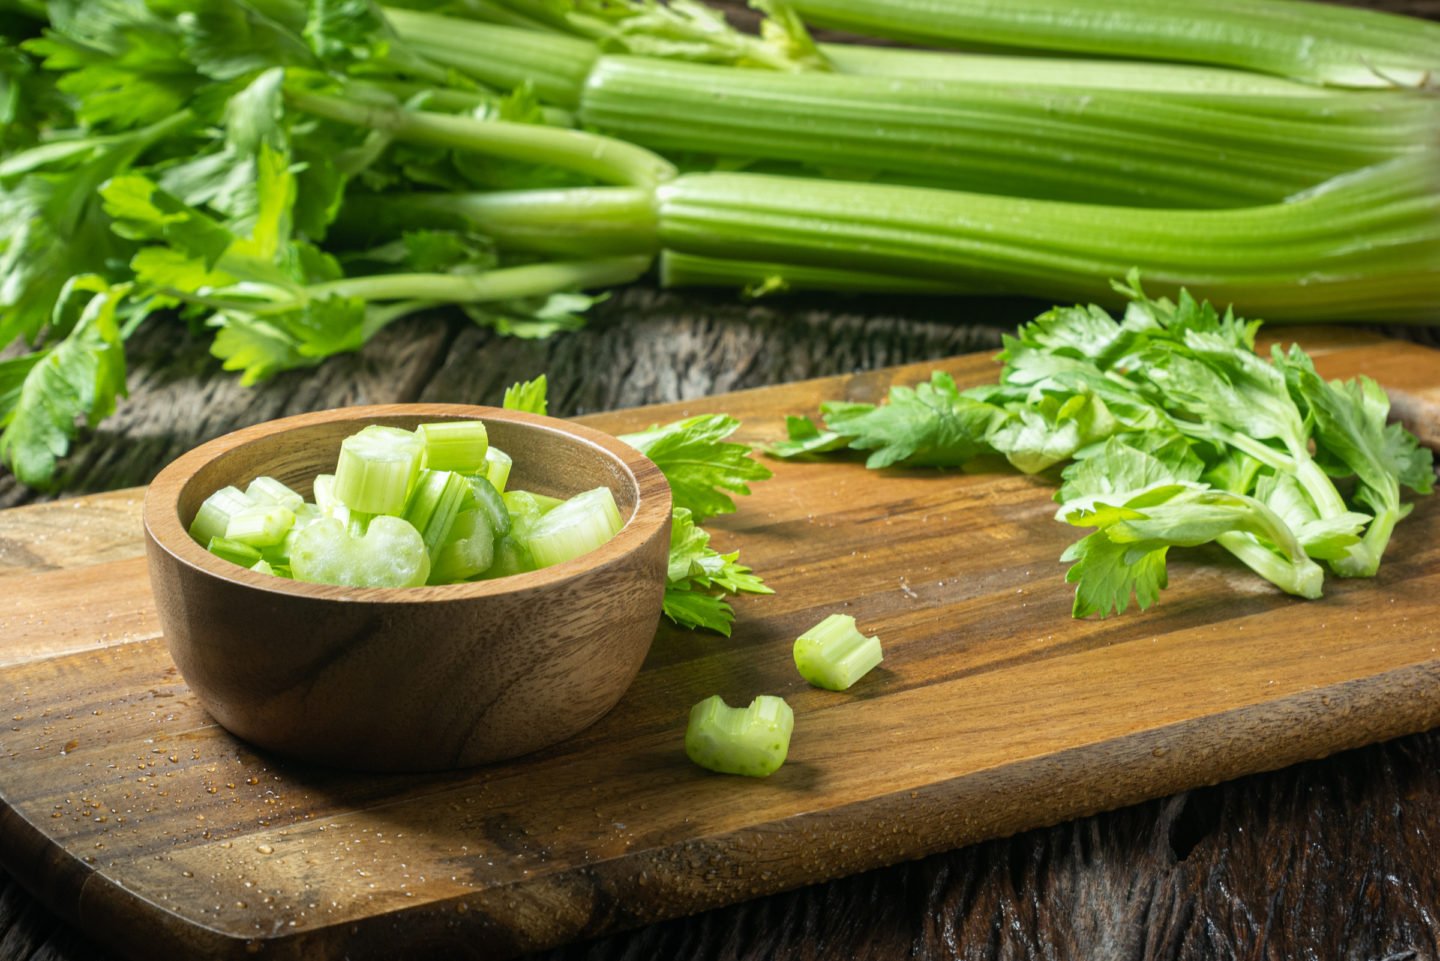 diced celery in a bowl with fresh celery stalks in the background